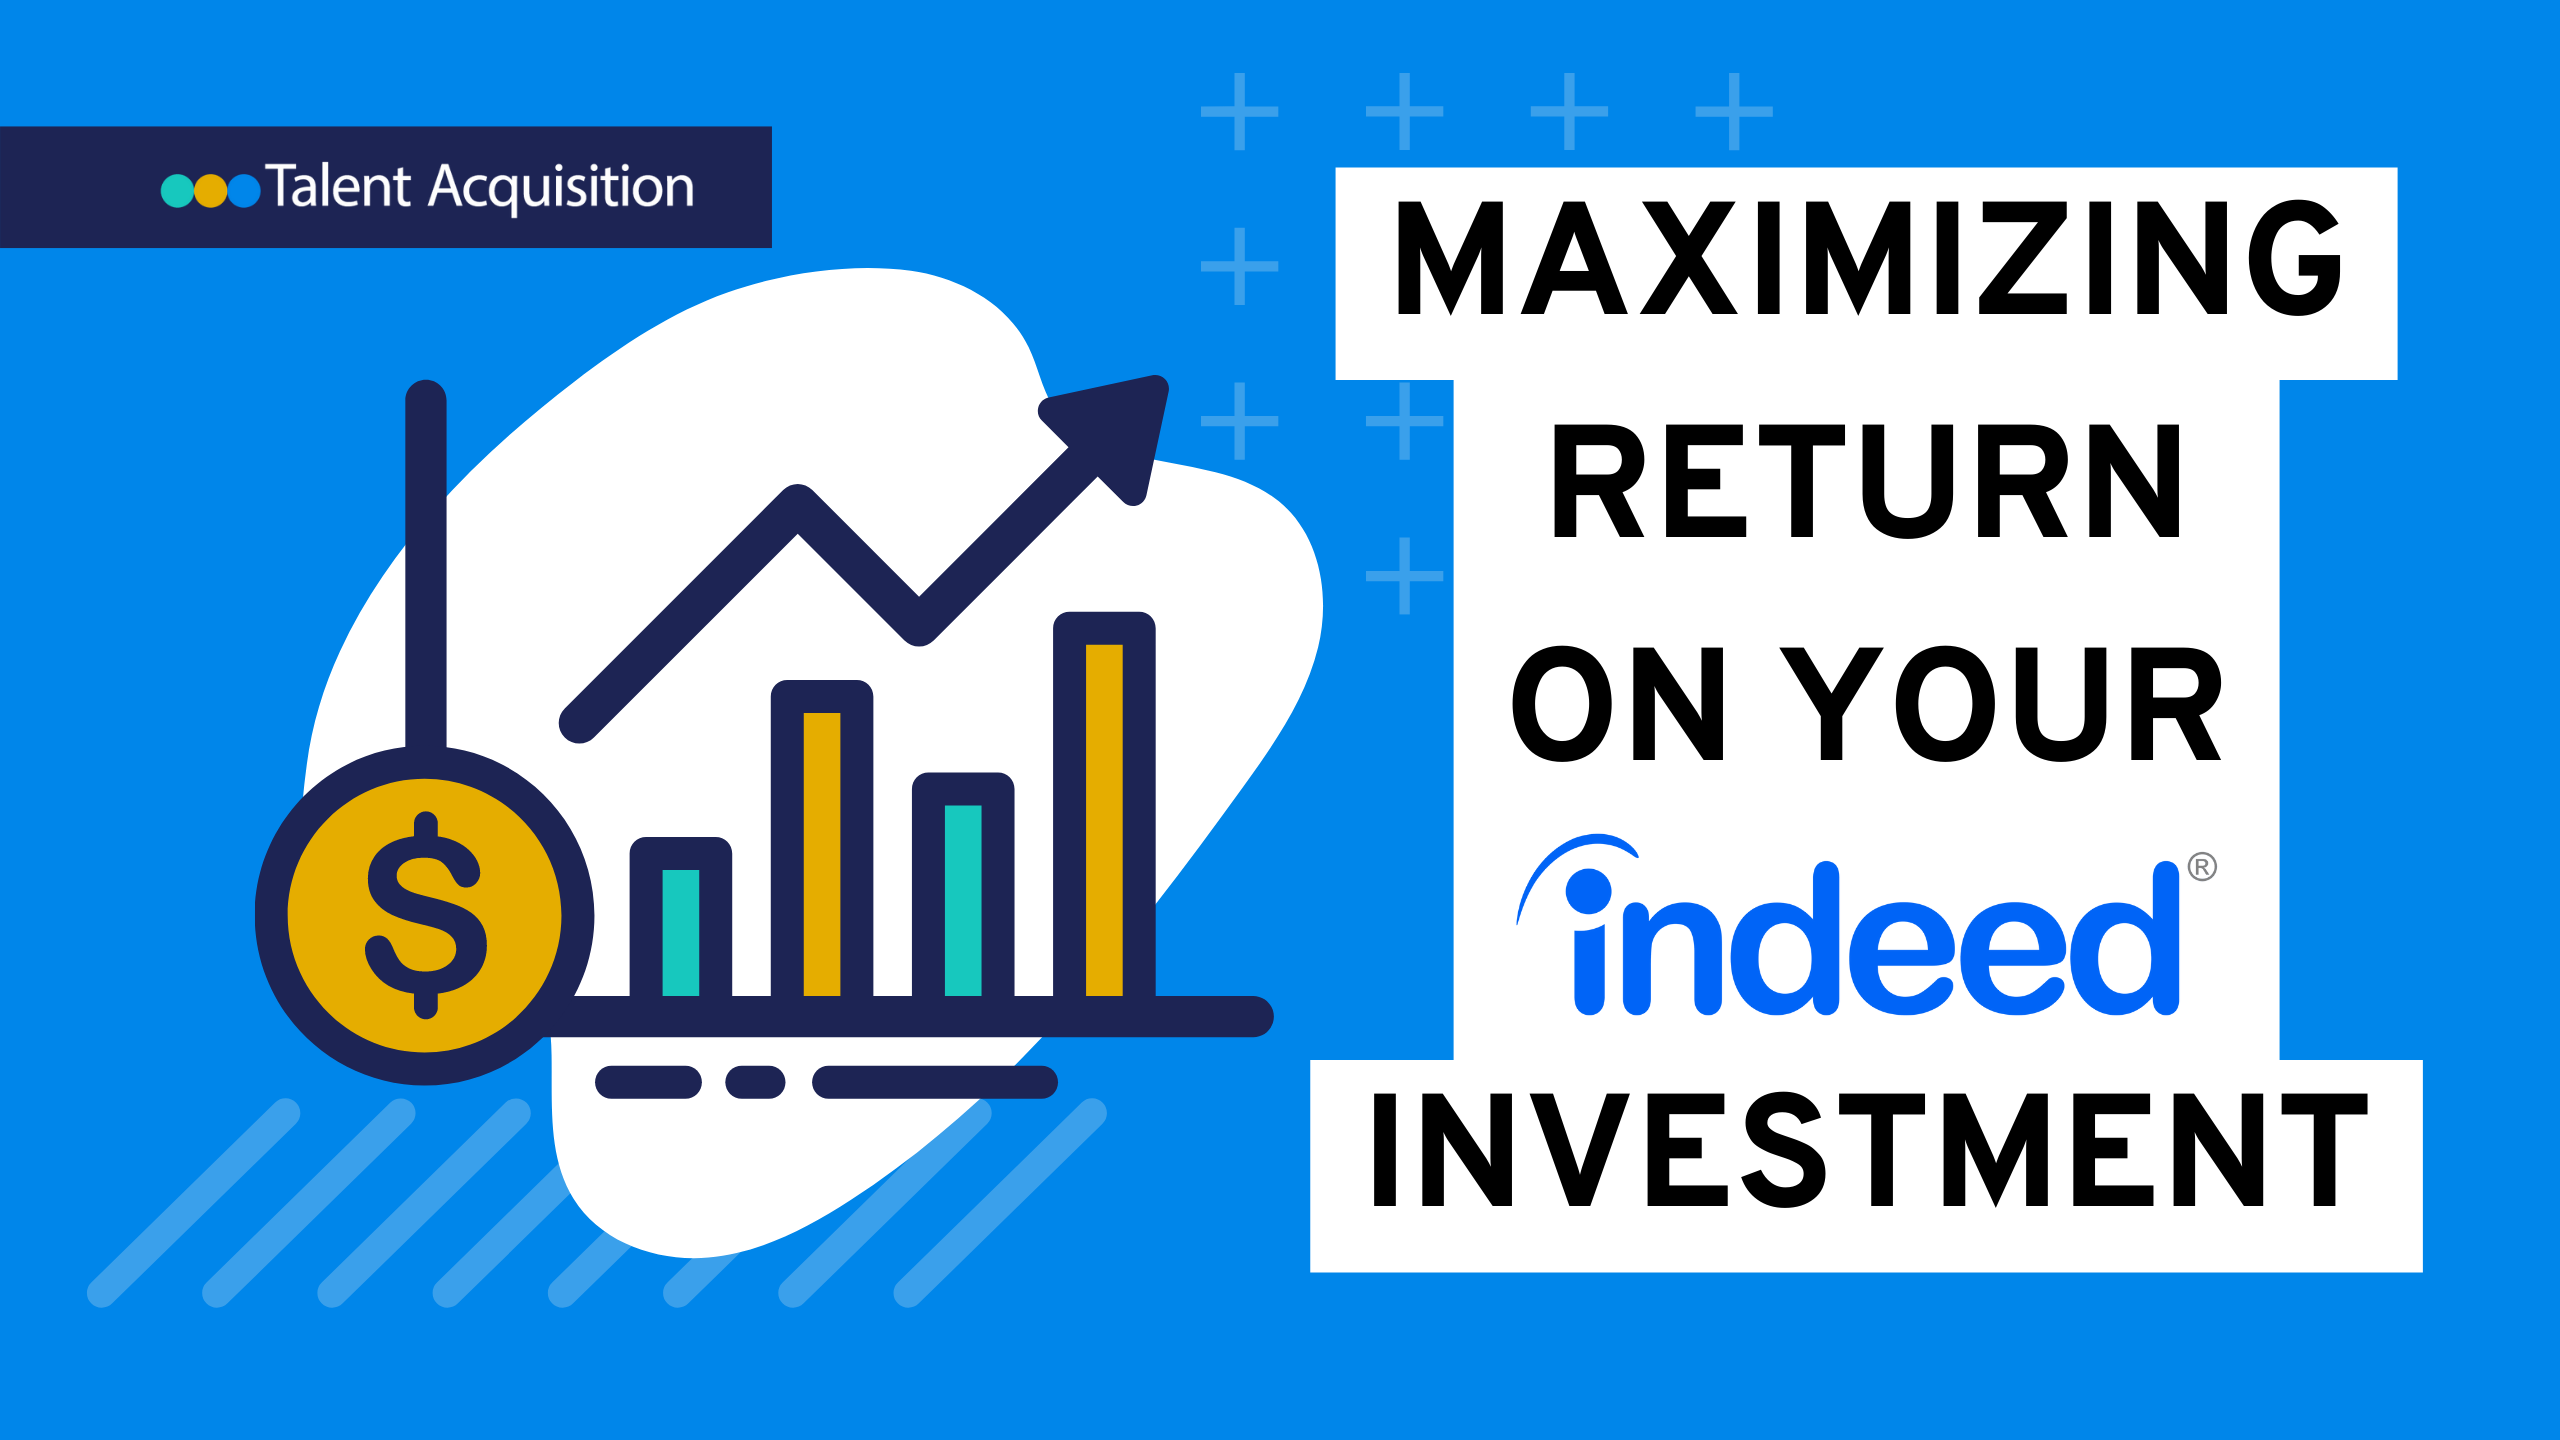 Maximizing Return on Your Indeed Investment